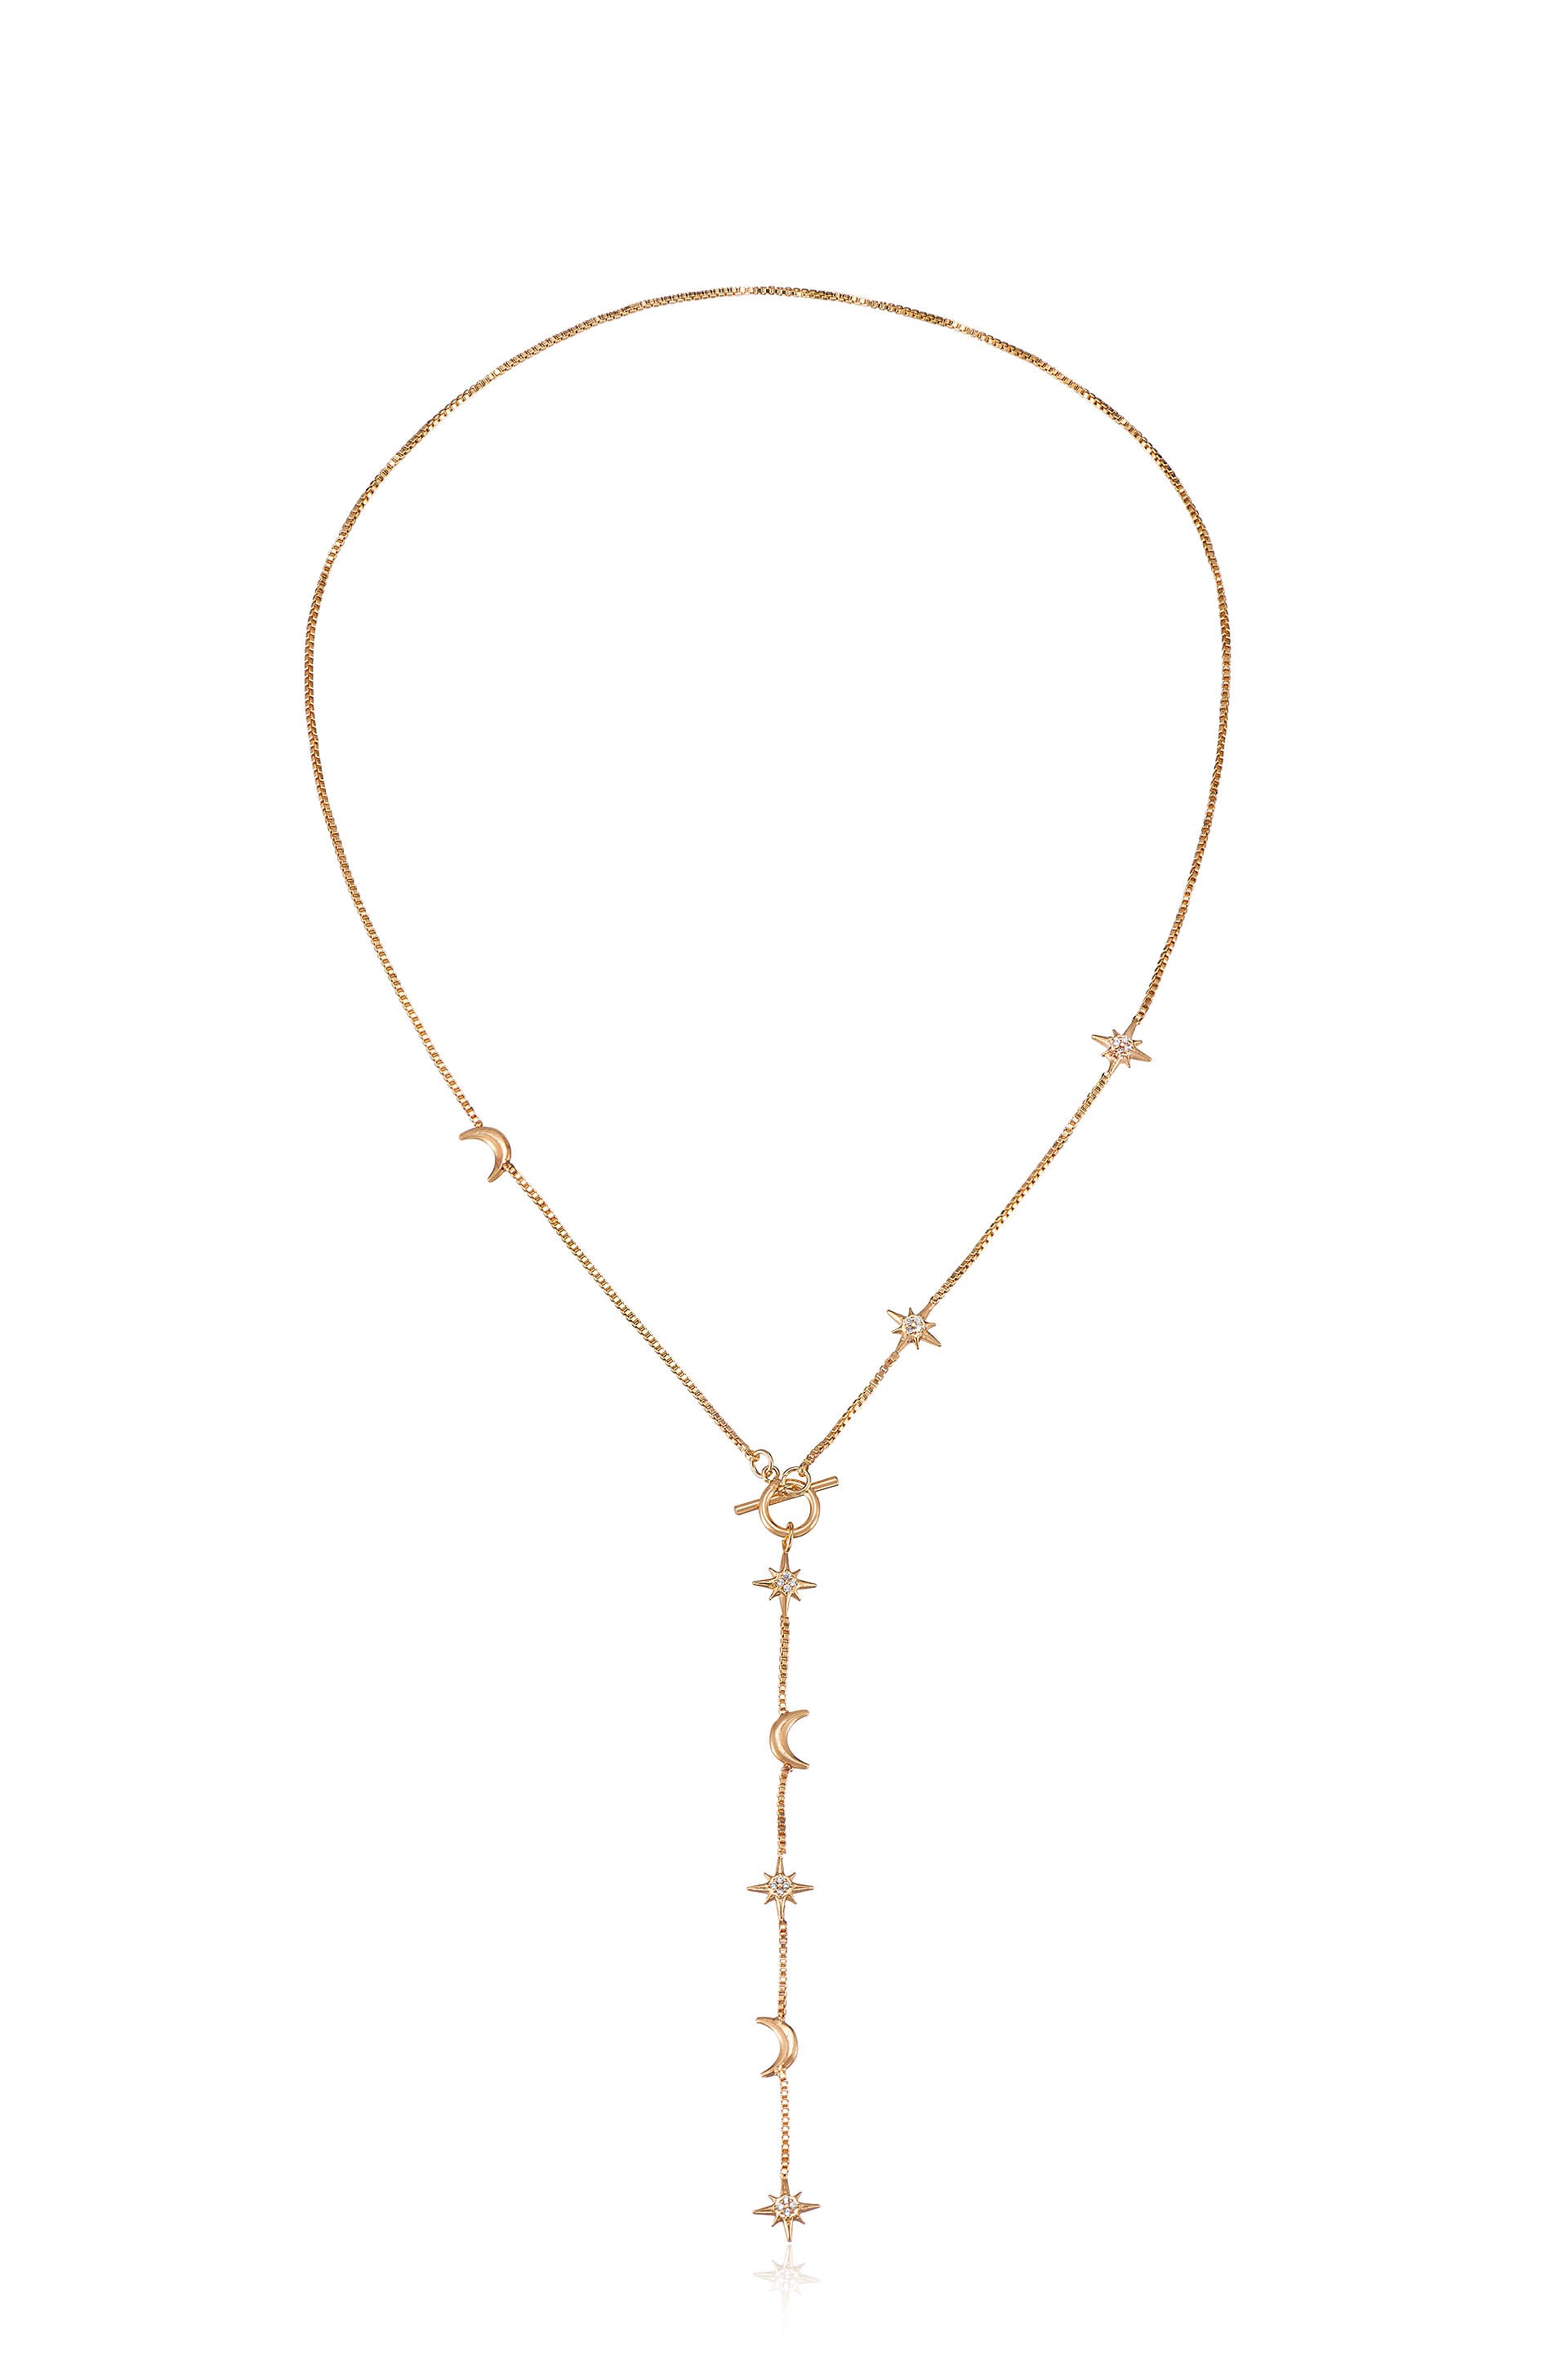 Delicate Celestial 18k Gold Plated Lariat Necklace full